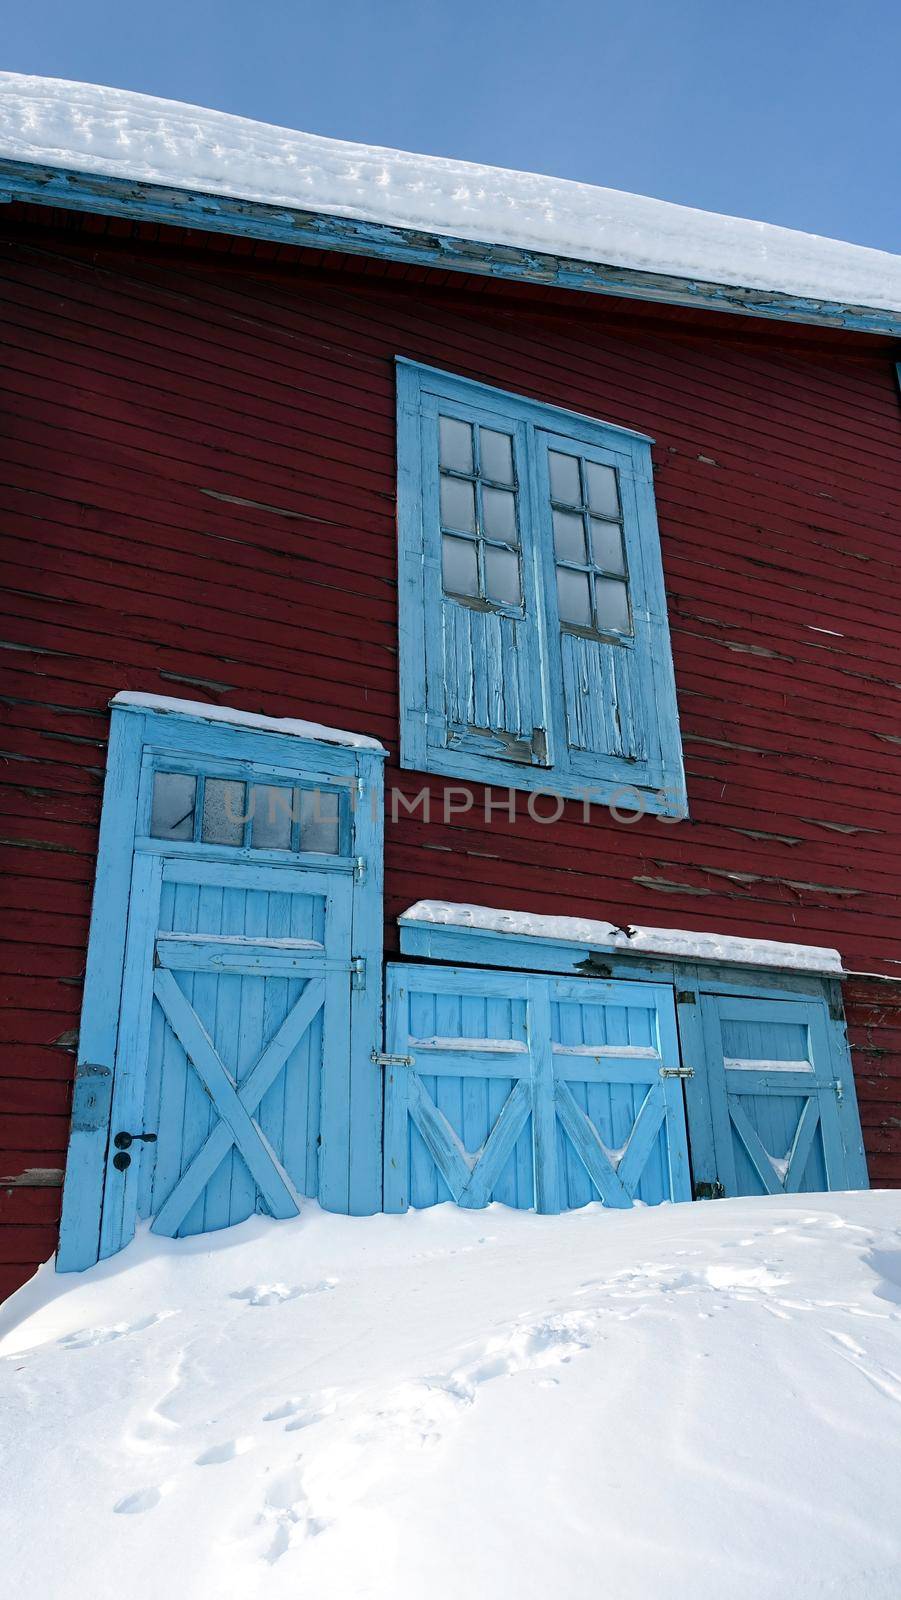 Historic building in the snowy center of Kiruna in northern Sweden during the winter